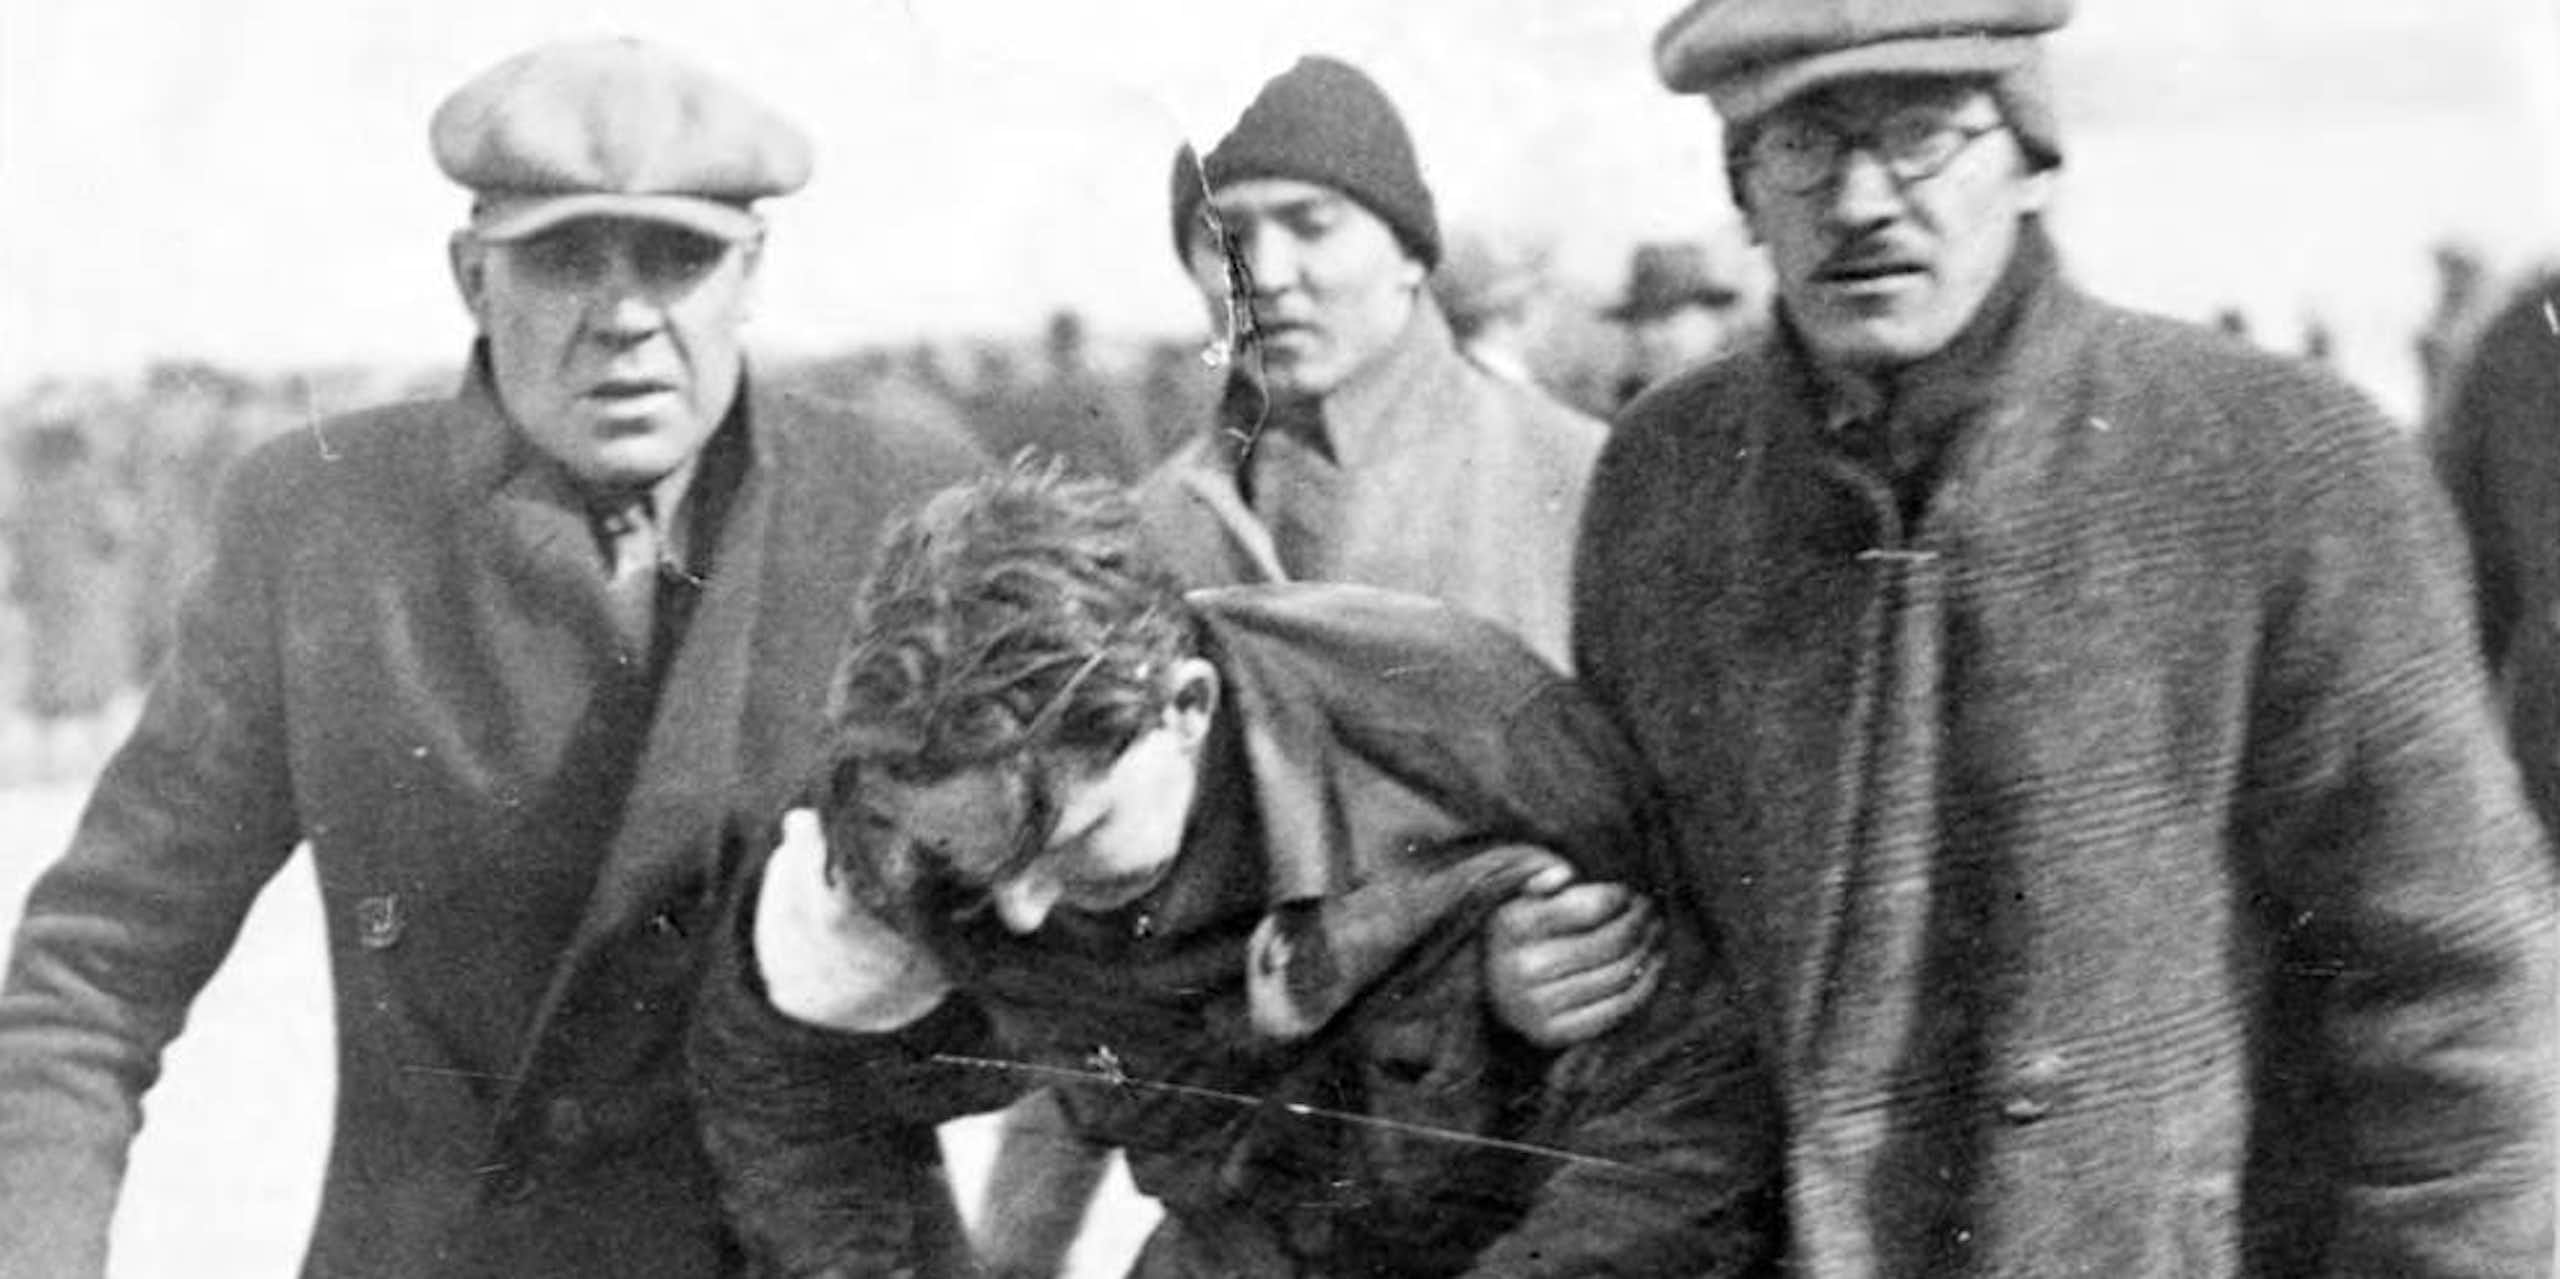 Two men  in winter coats carry a third man who has been injured.